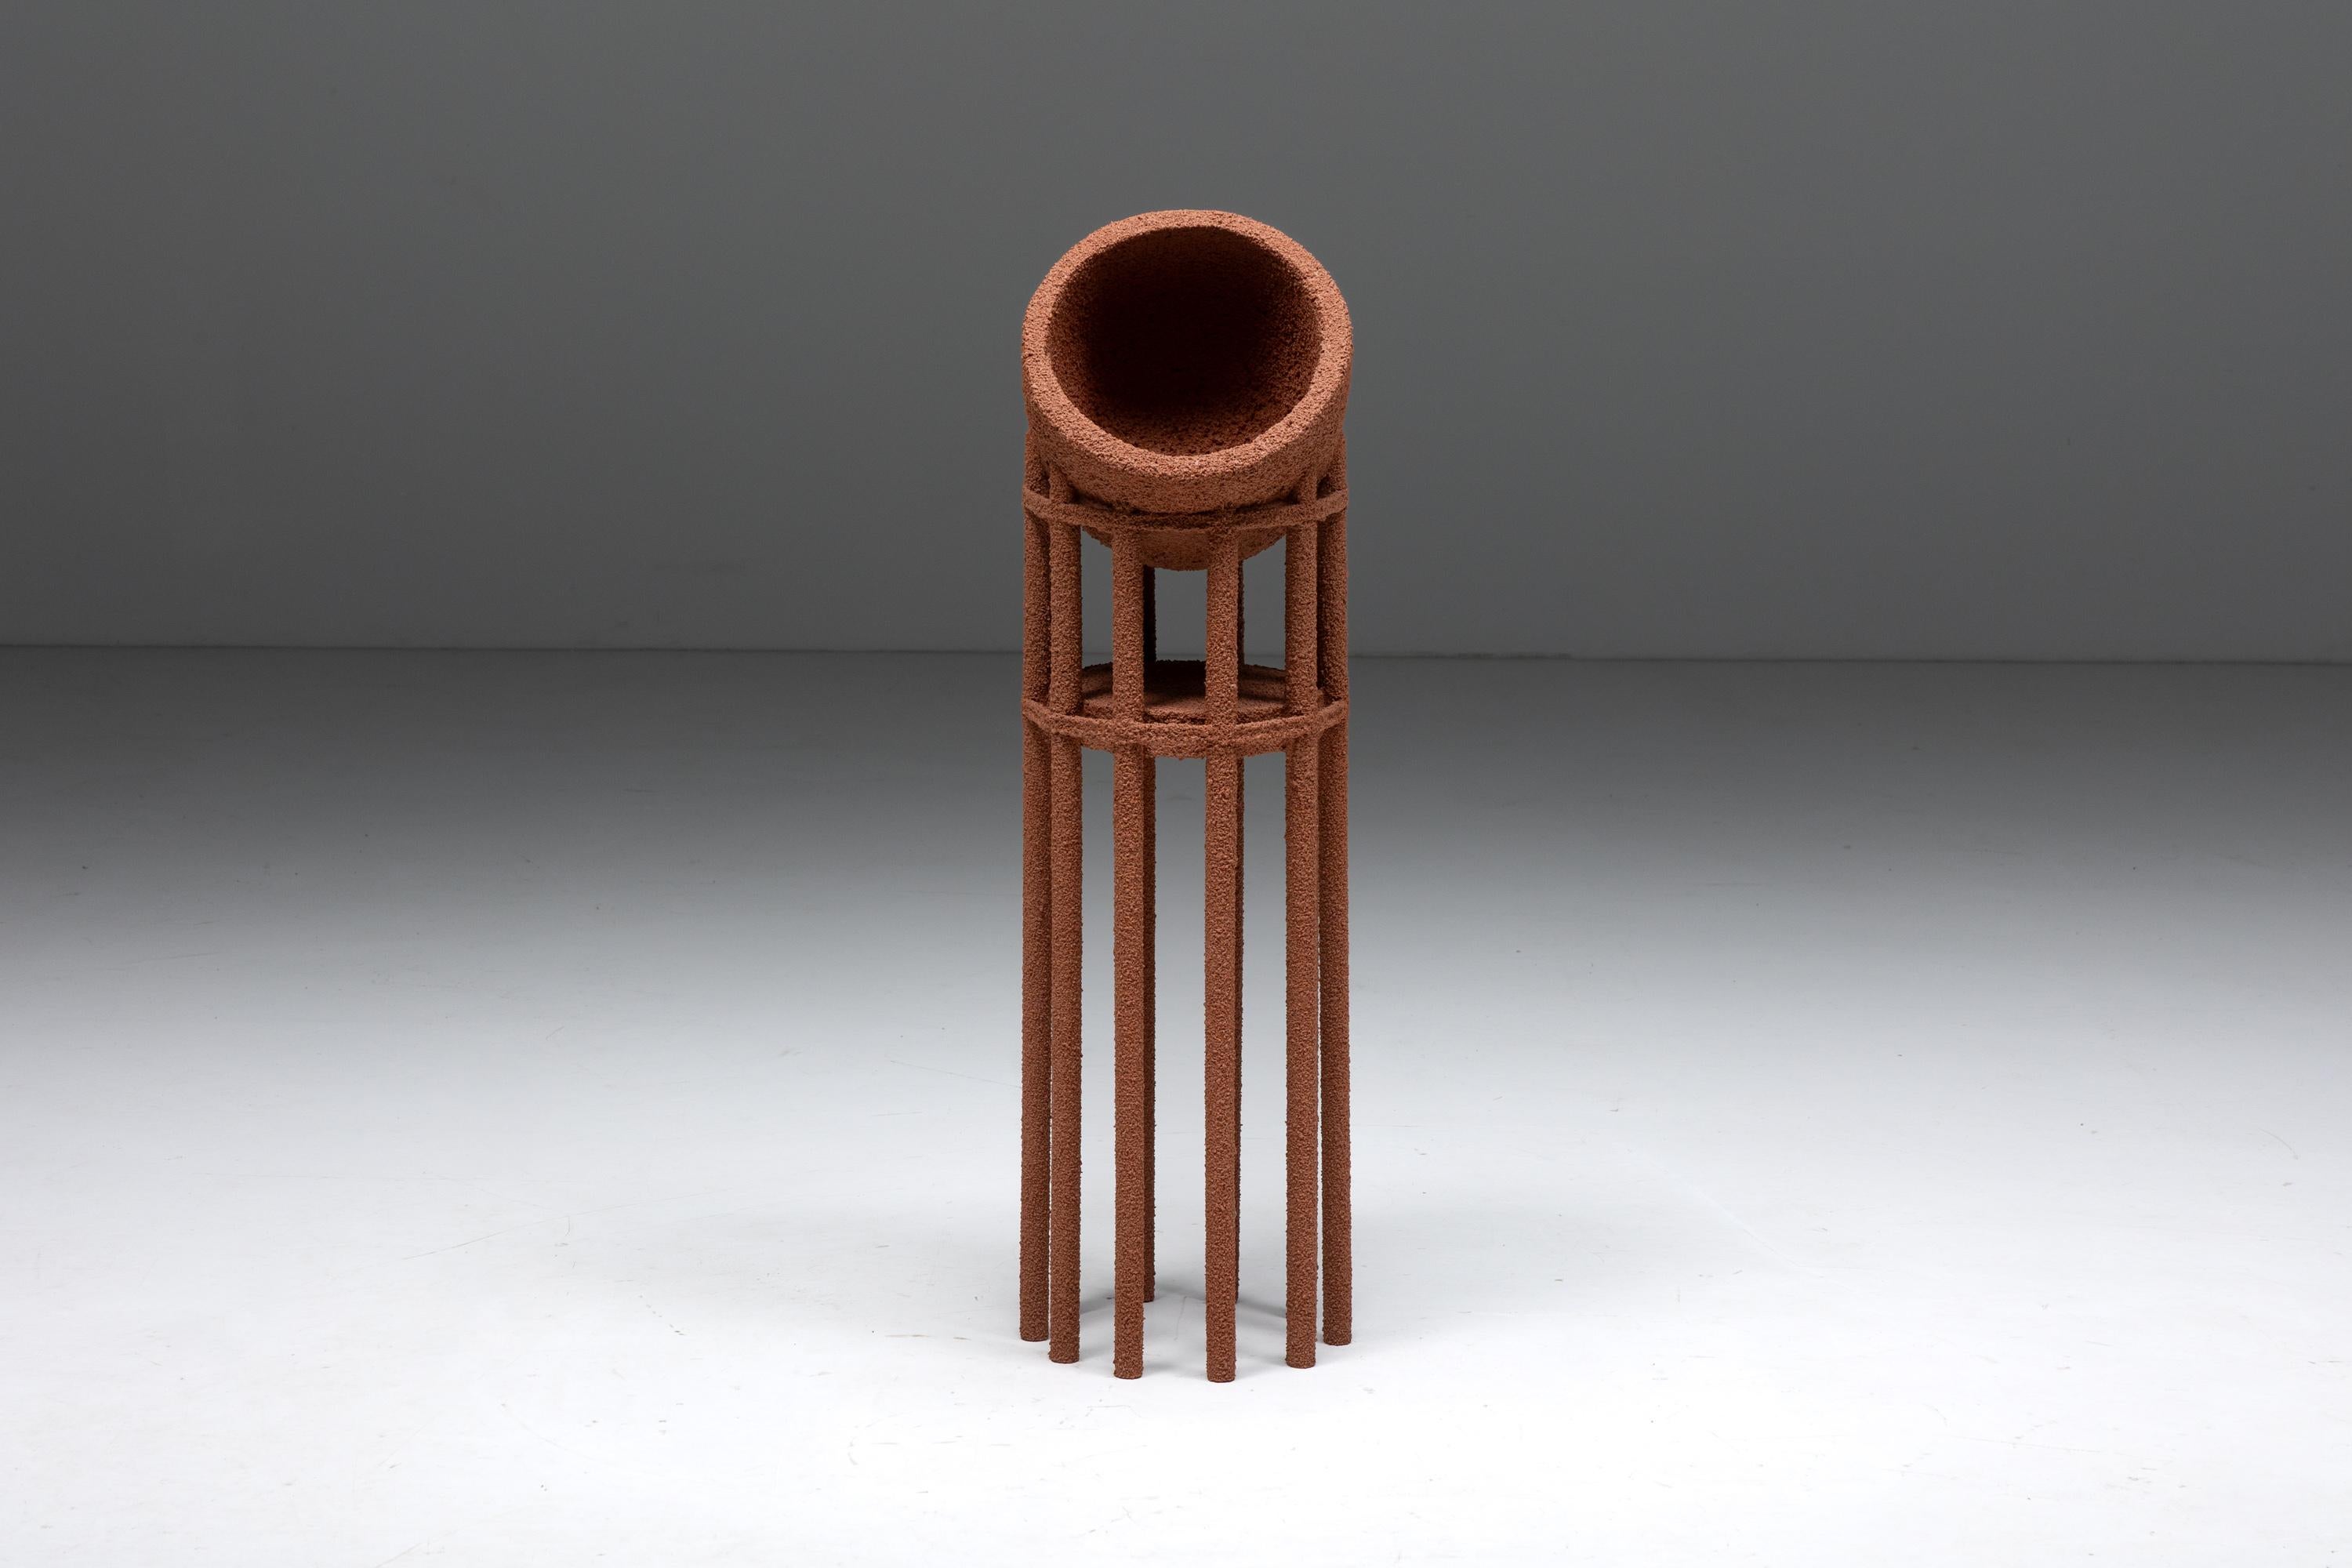 Object by Parisian object designer Thomas Ballouhey from his final project 